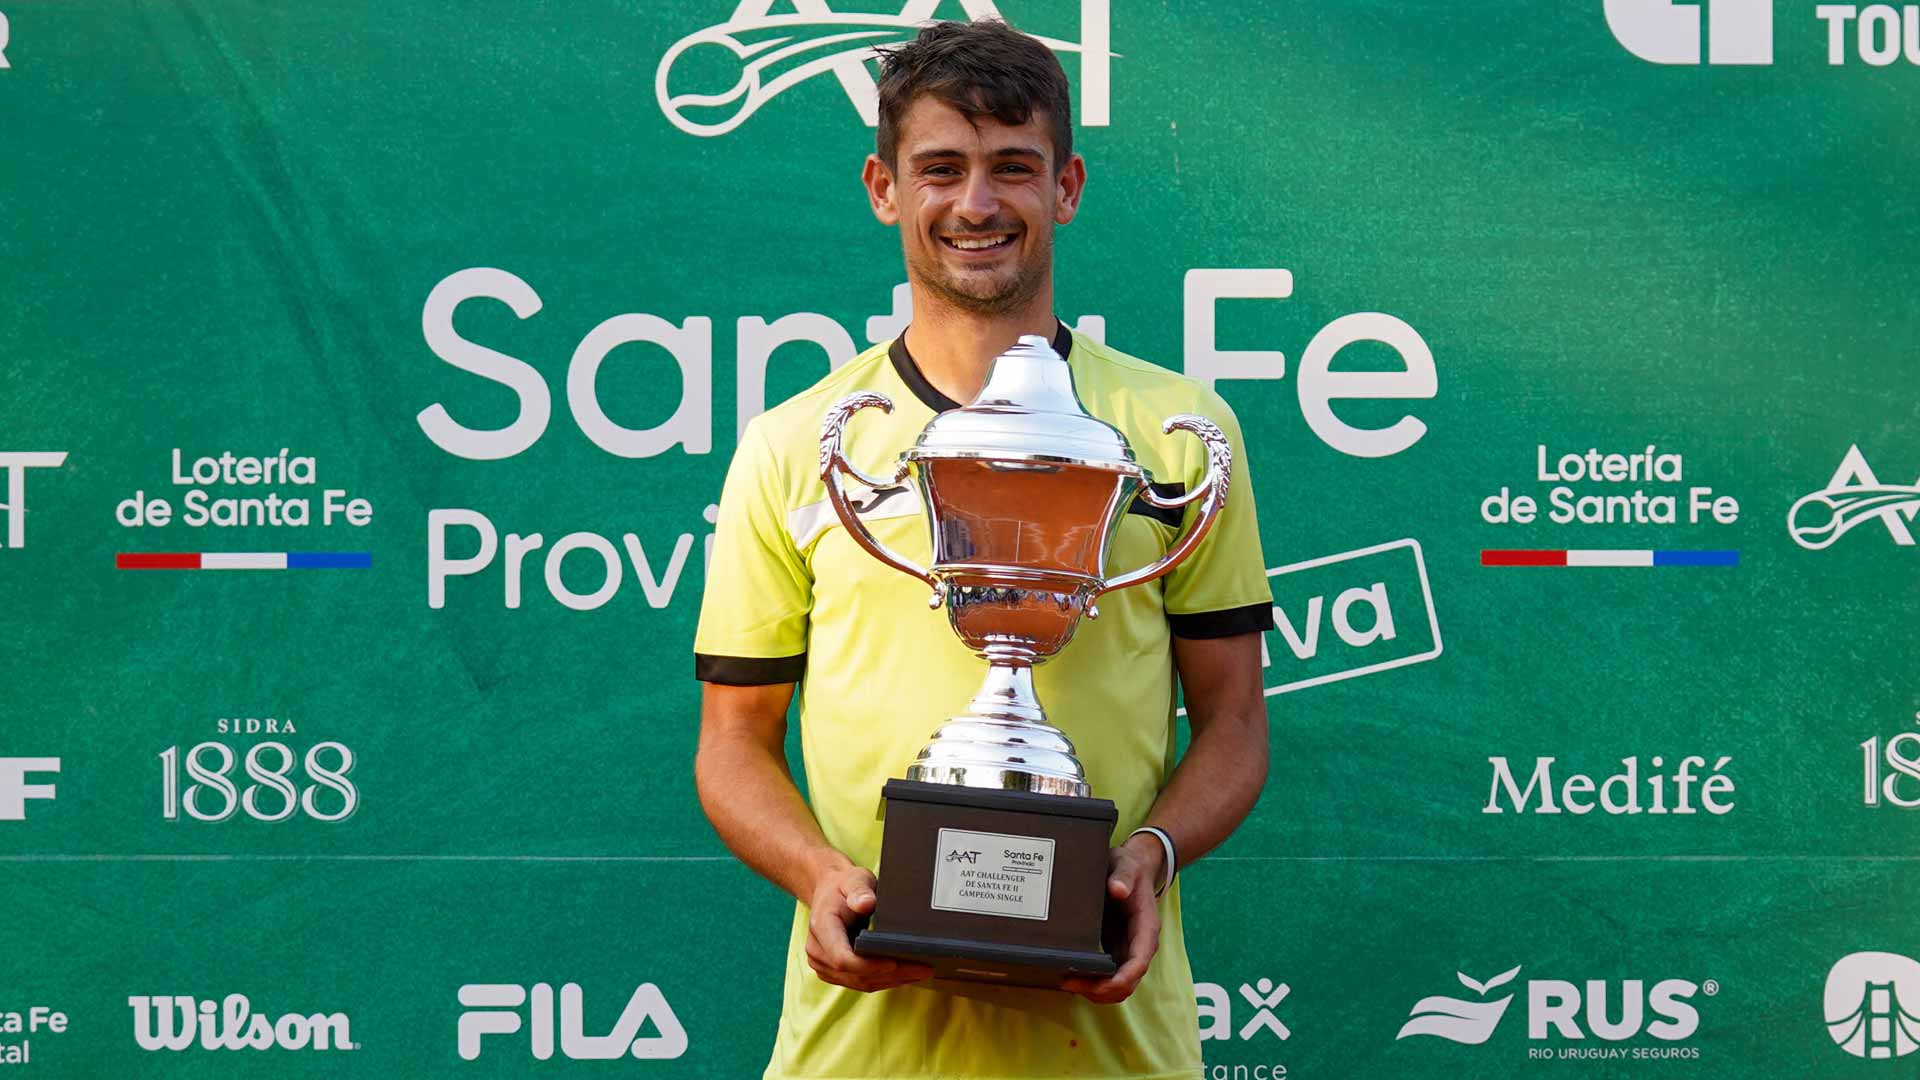 Mariano Navone wins his fifth ATP Challenger Tour title of 2023 at the AAT Challenger Santa Fe 2.